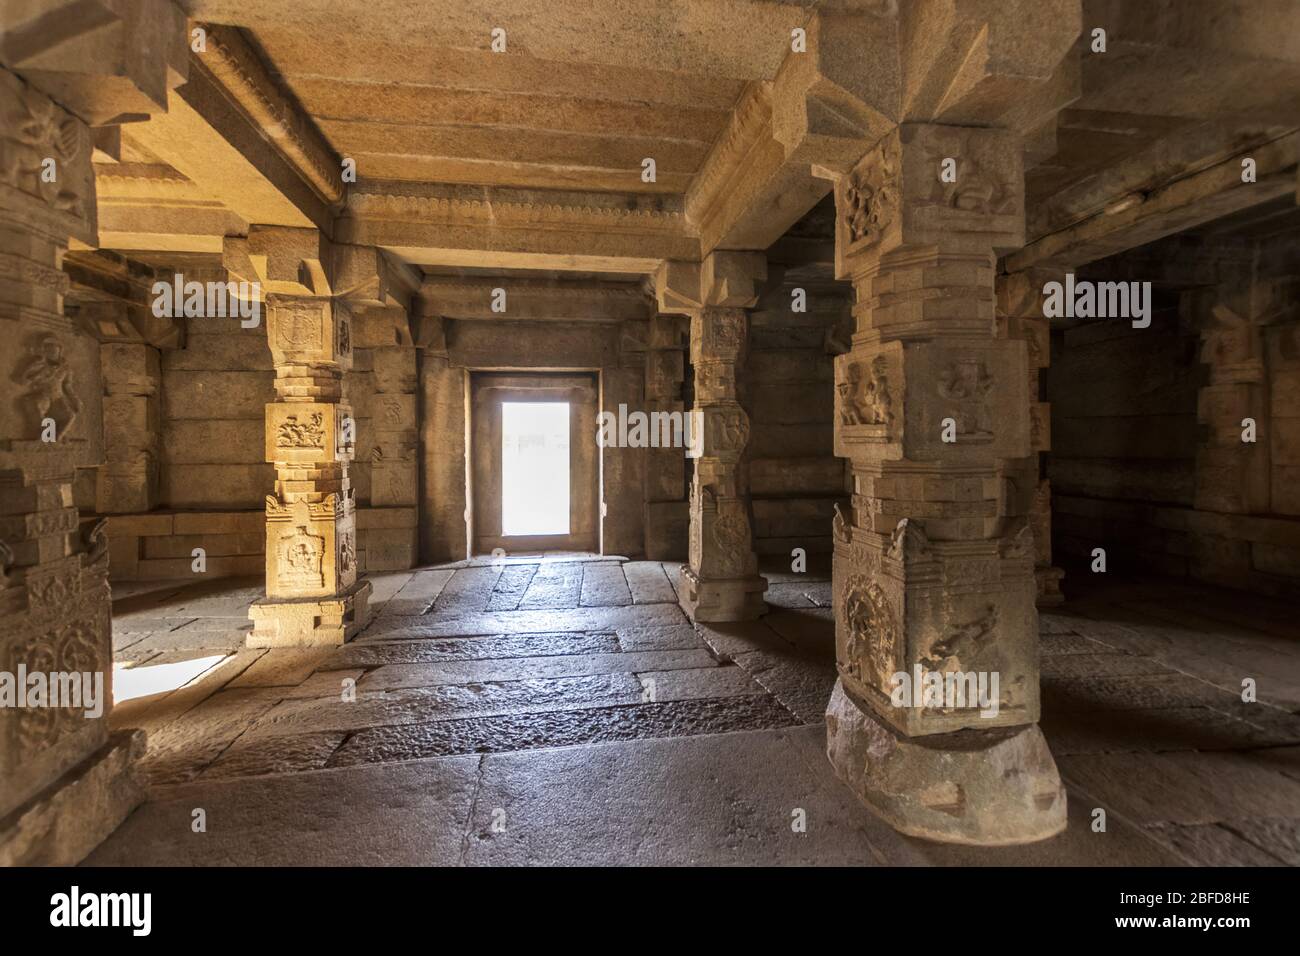 Ancient civilization in Hampi. India, State Karnataka. Old Hindu temples and ruins. The interior of the temple. Stock Photo